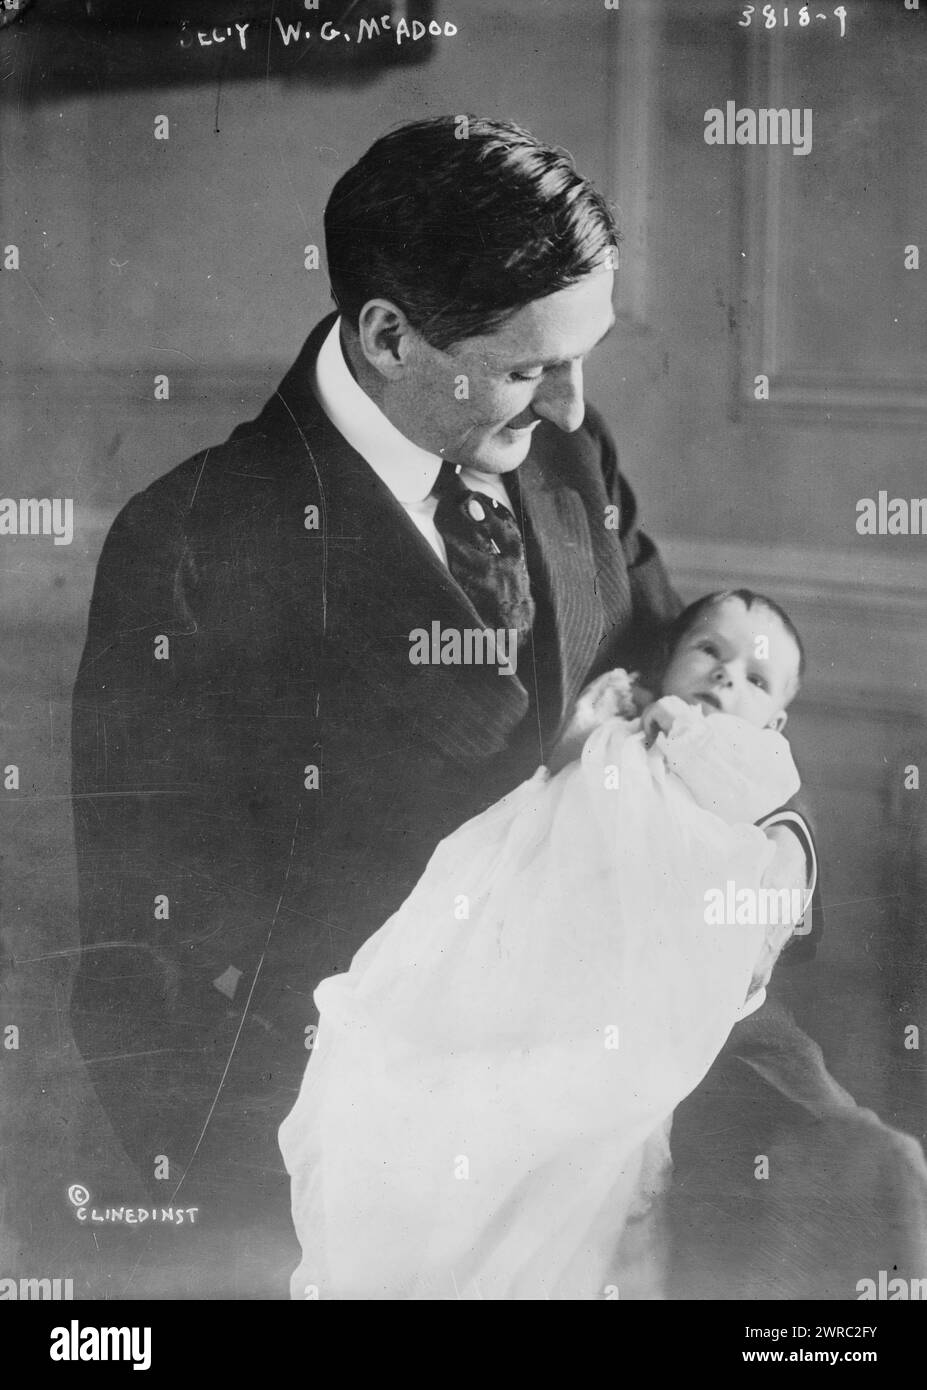 Secy W.G. McAdoo, Photograph shows William Gibbs McAdoo (1863-1941), Secretary of the Treasury in President Woodrow Wilson's cabinet from 1913 to 1918 and husband of Wilson's daughter Eleanor, with their daughter, Ellen Wilson McAdoo (1914-1946)., between ca. 1915 and ca. 1920, Glass negatives, 1 negative: glass Stock Photo